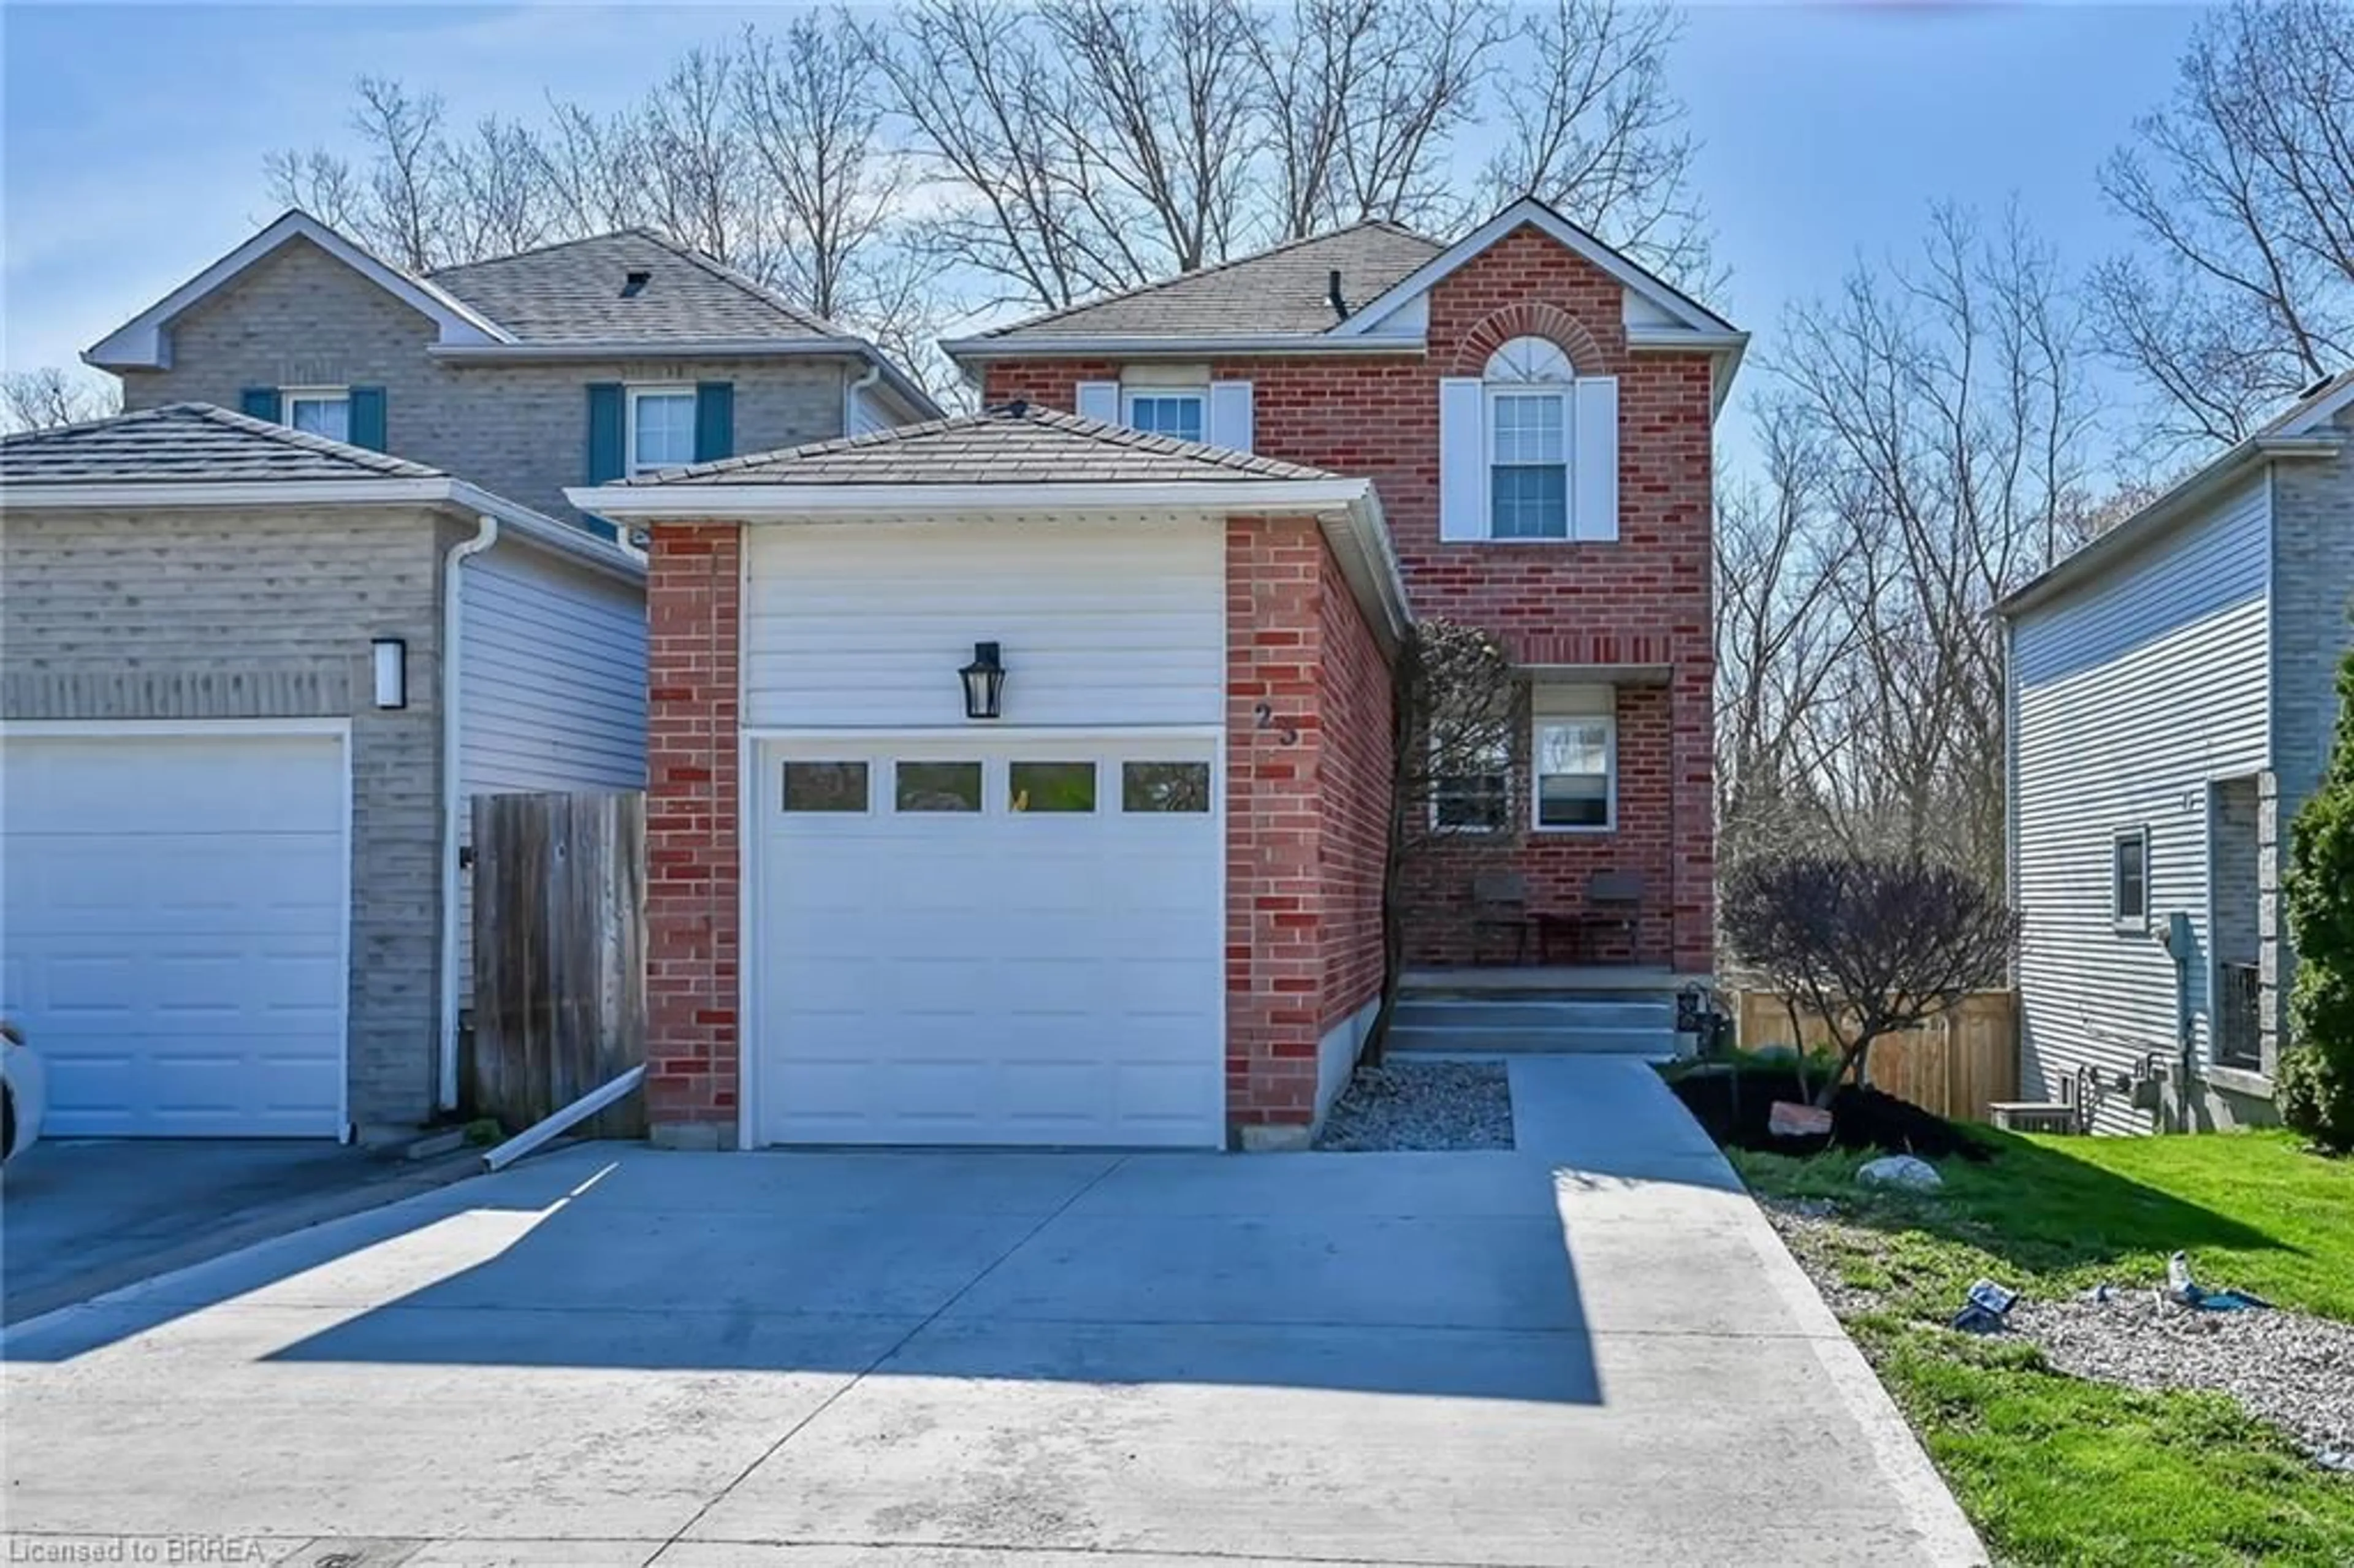 Home with brick exterior material for 25 D'aubigny Rd, Brantford Ontario N3T 6J2